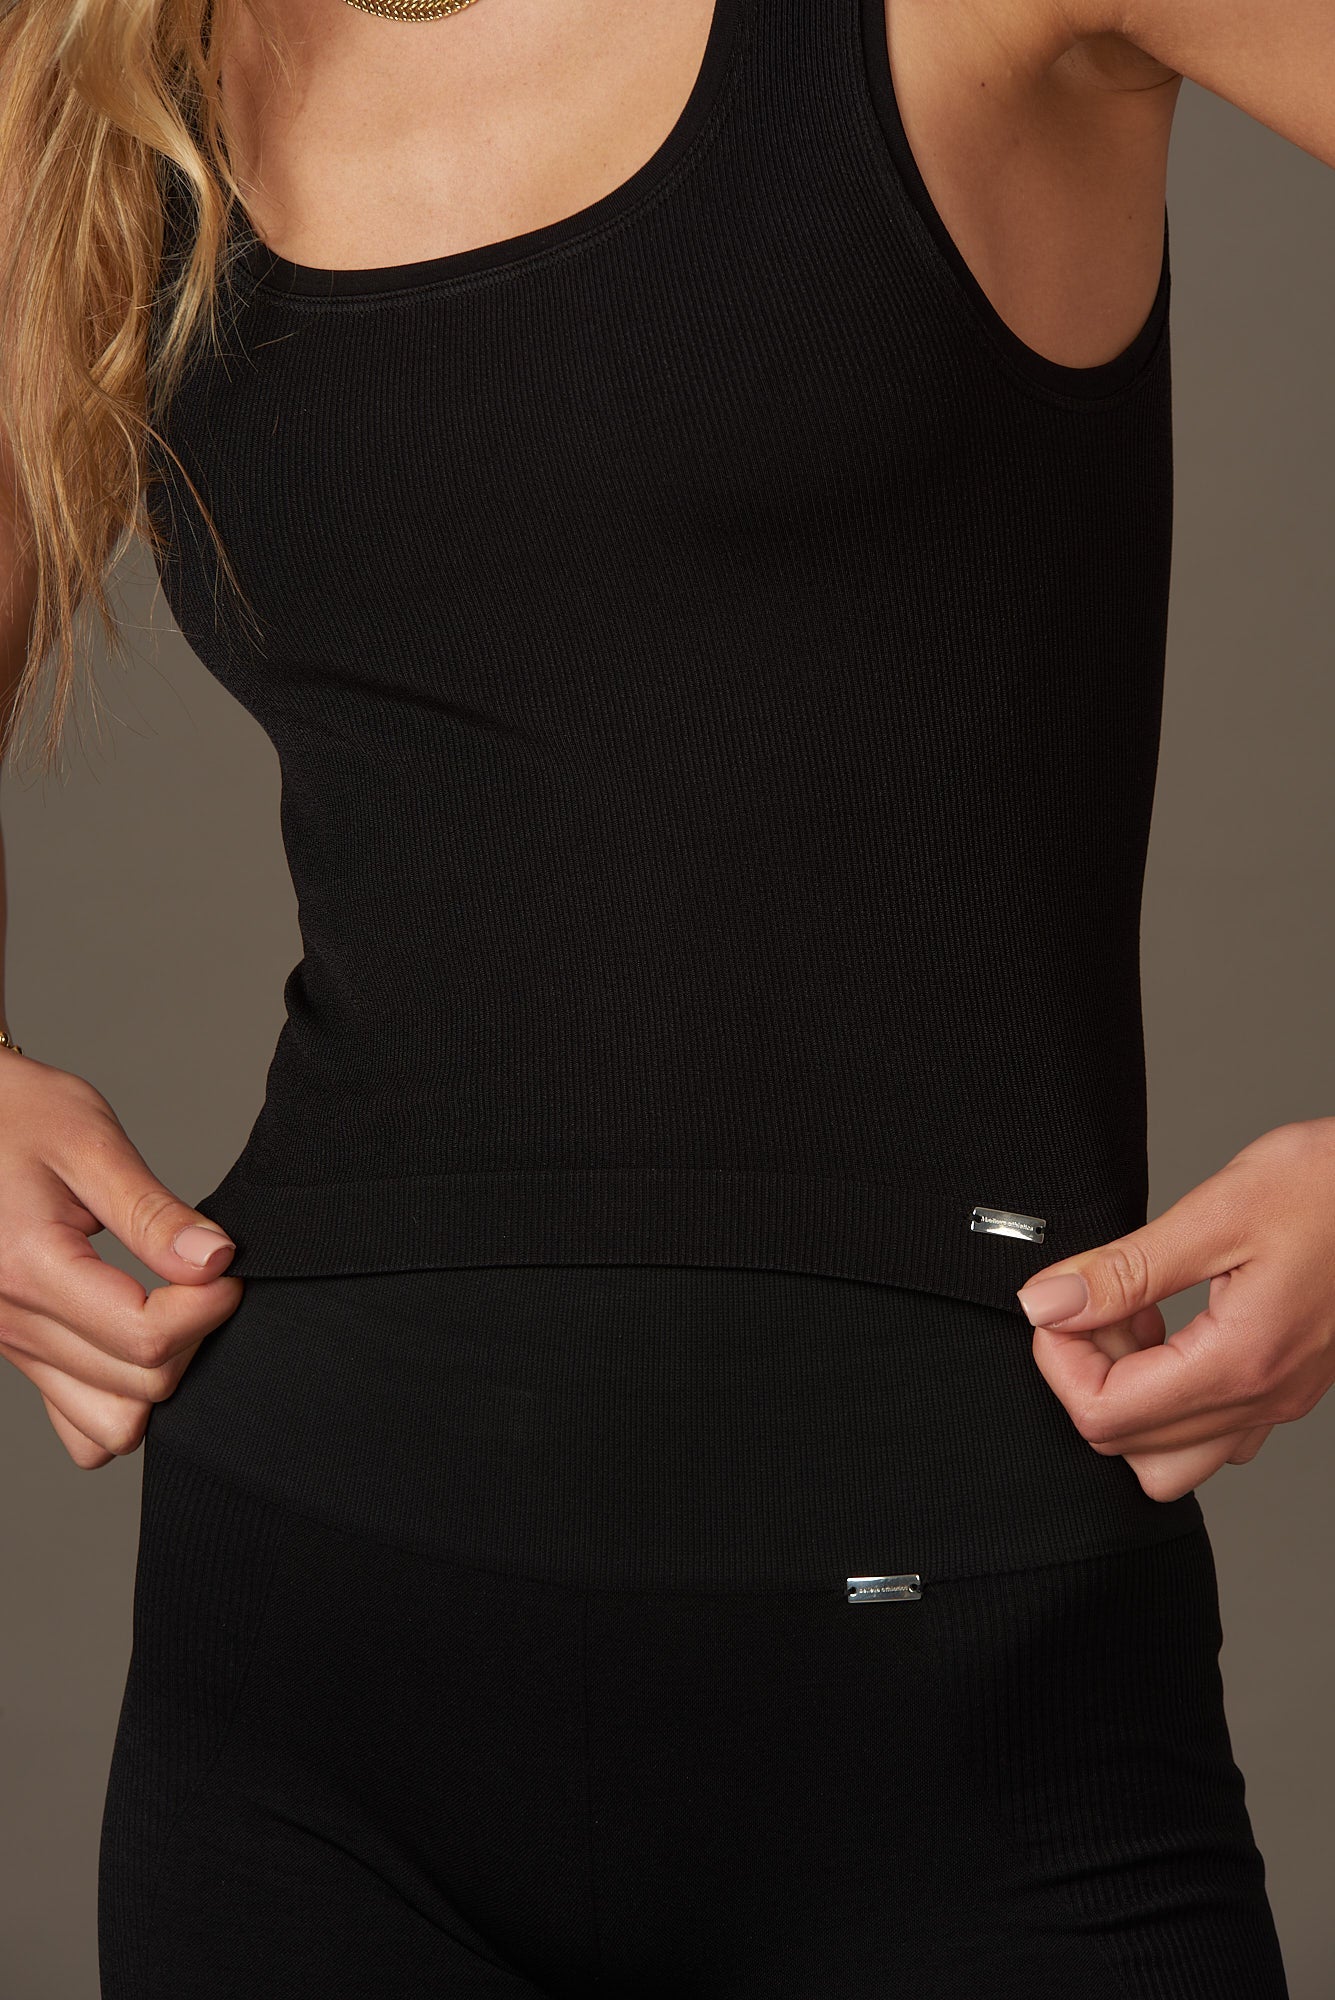 Gleam Top in Black-Tops-Shop Clothing Leggings Sustainable Recycled Yoga Clothes Women On-line Barcelona Believe Athletics Sustainable Recycled Yoga Clothes